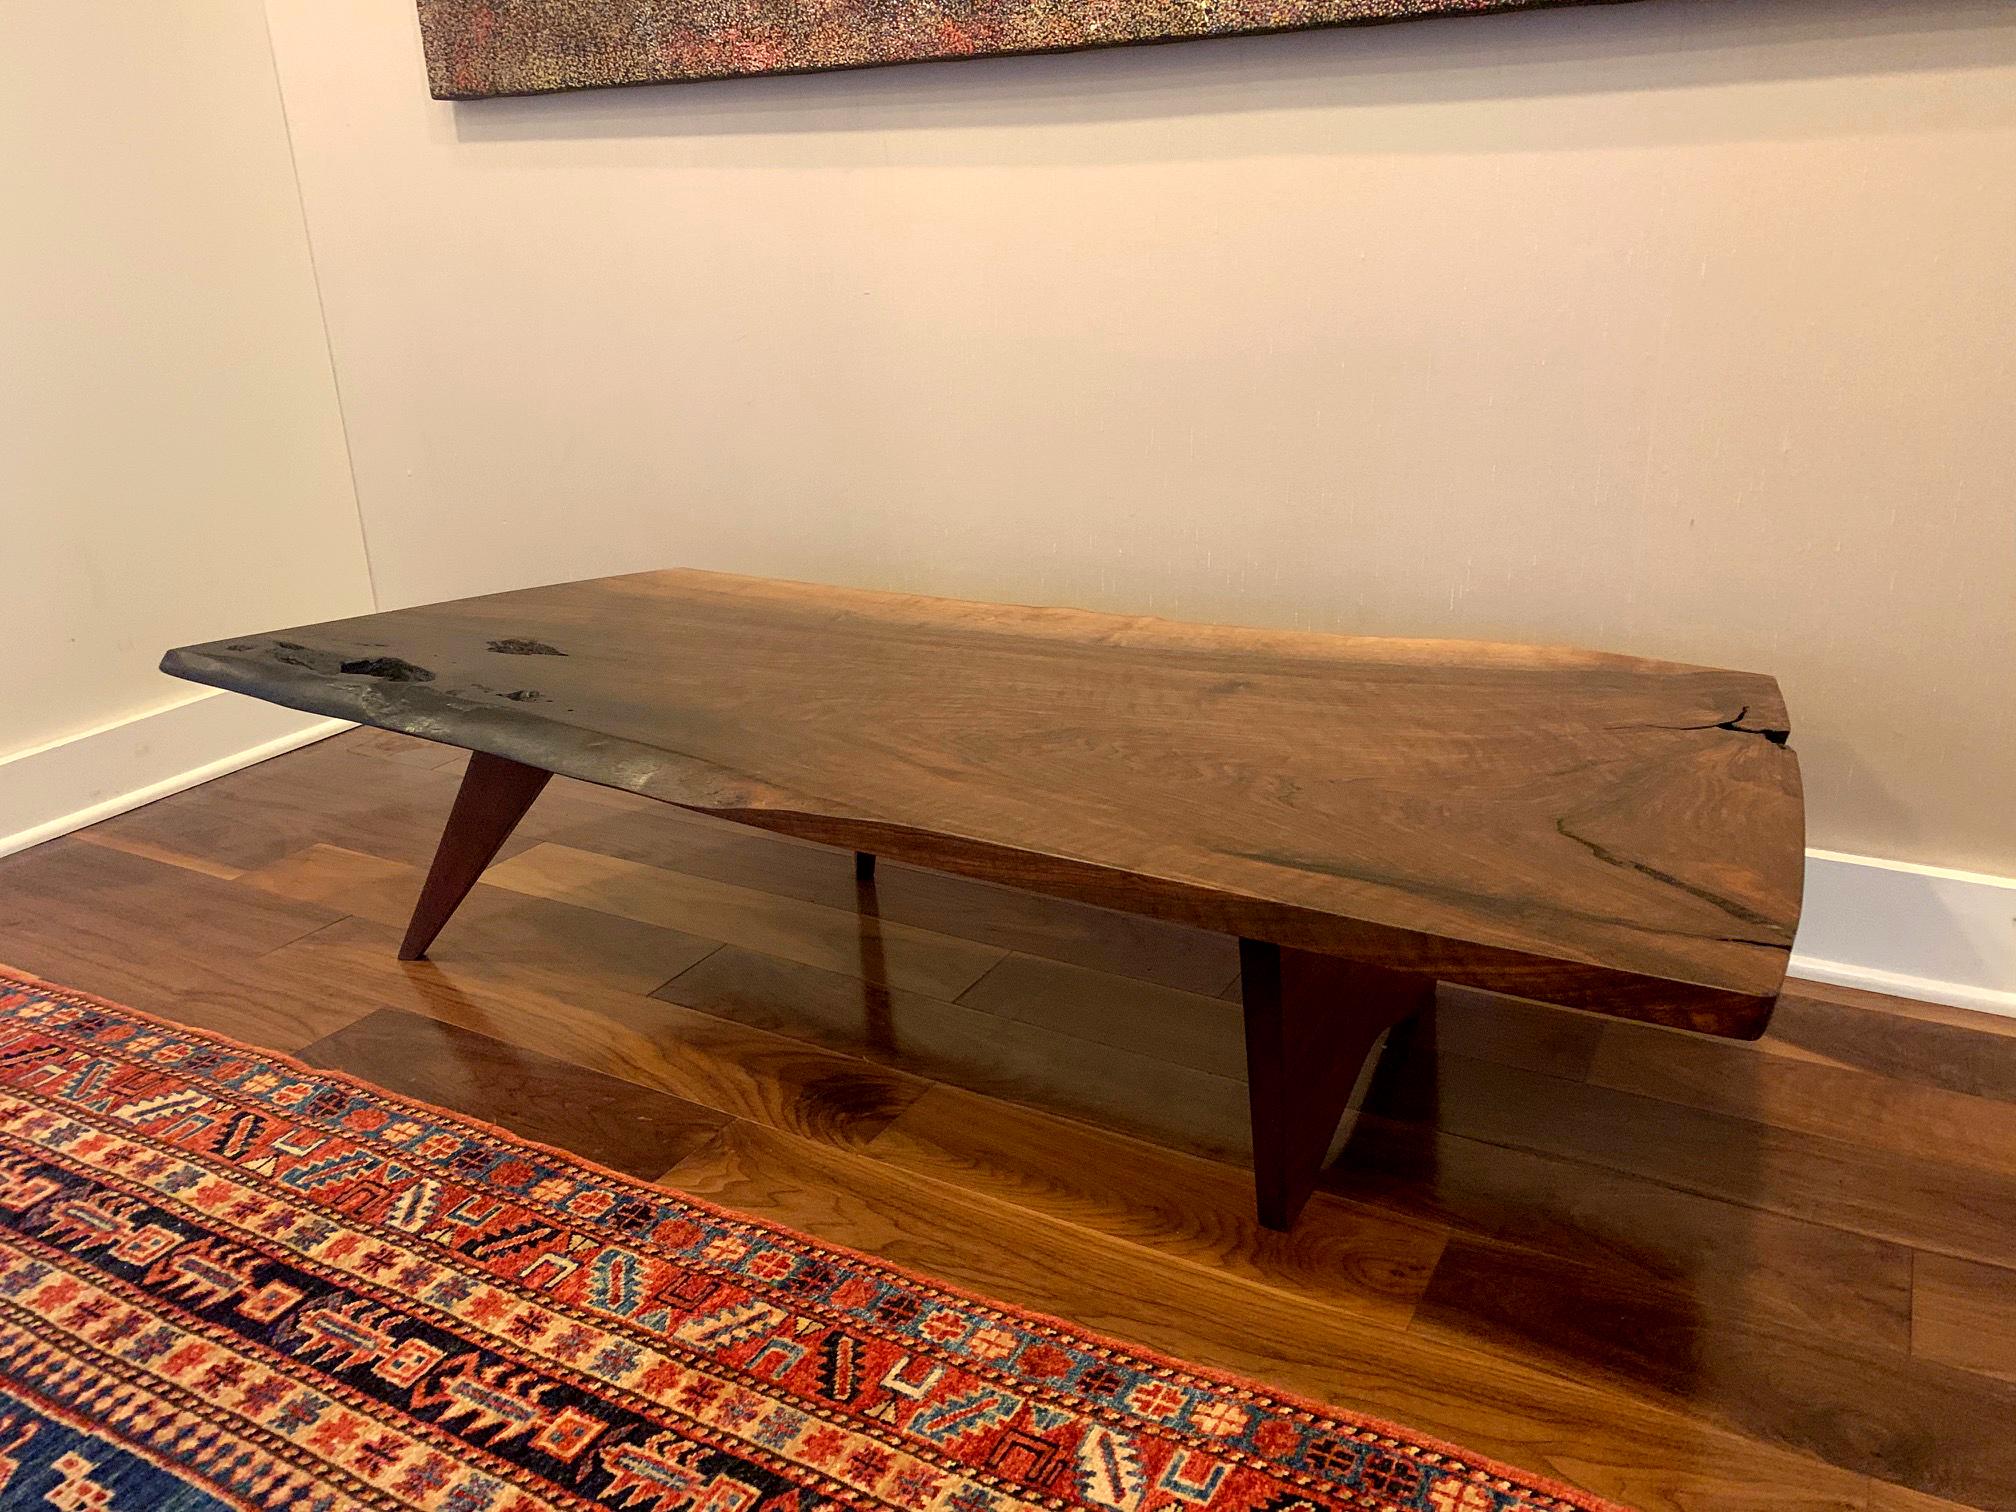 A stunning piece of furniture art by George Nakashima (1905-1990) from his early studio years circa 1958. It features a selected American walnut slab with amazing characters, finely crafted to showcase the design philosophy of George Nakashima: Let